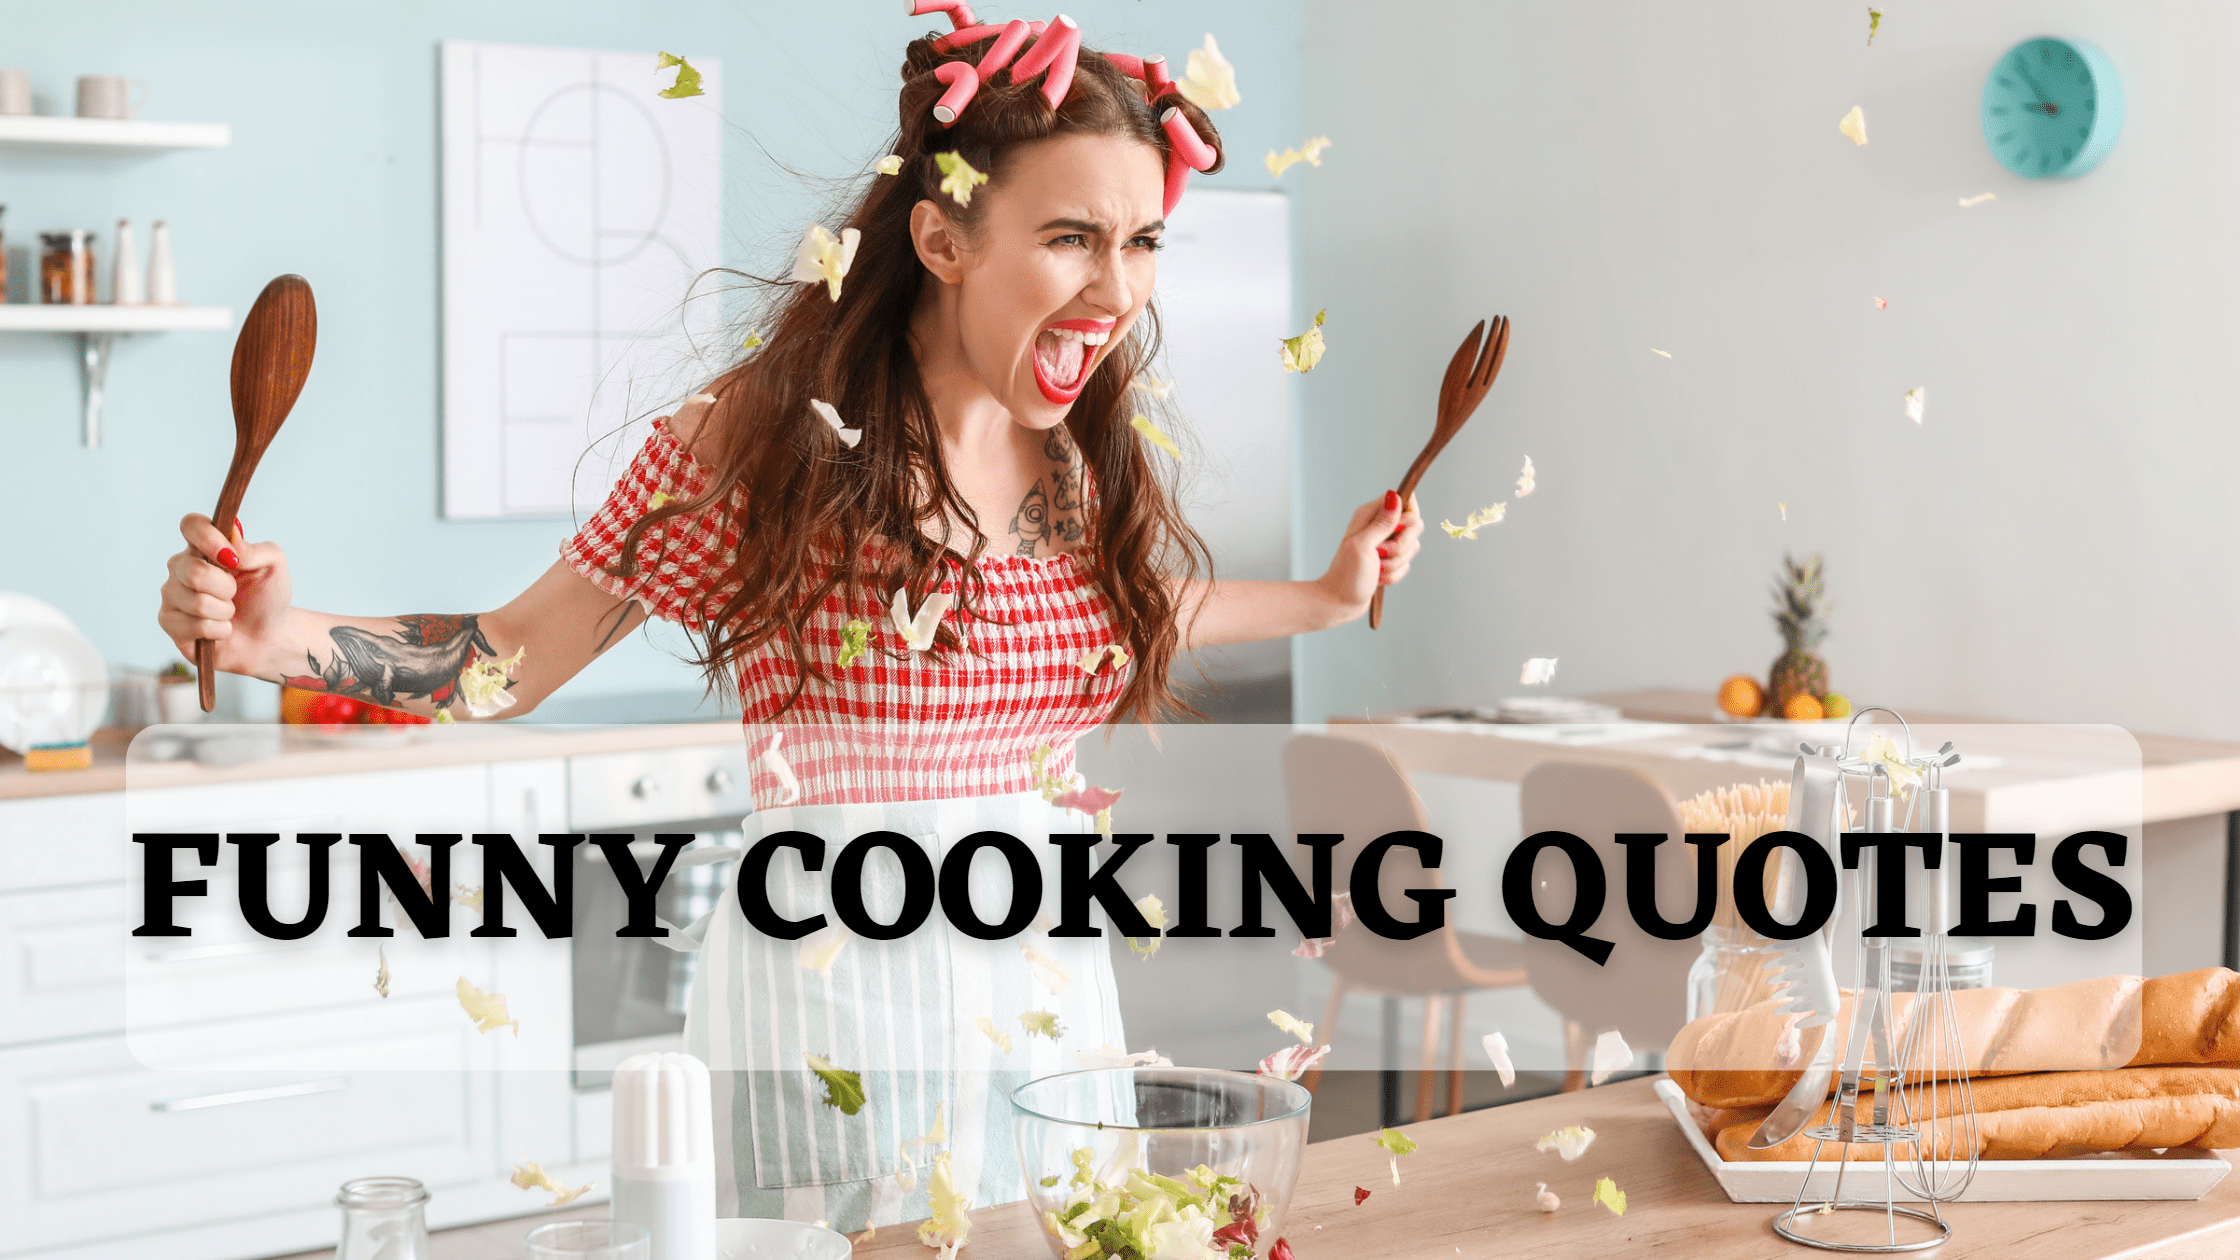 Laugh Out Loud: Funny Cooking Quotes to Spice Up Your Kitchen